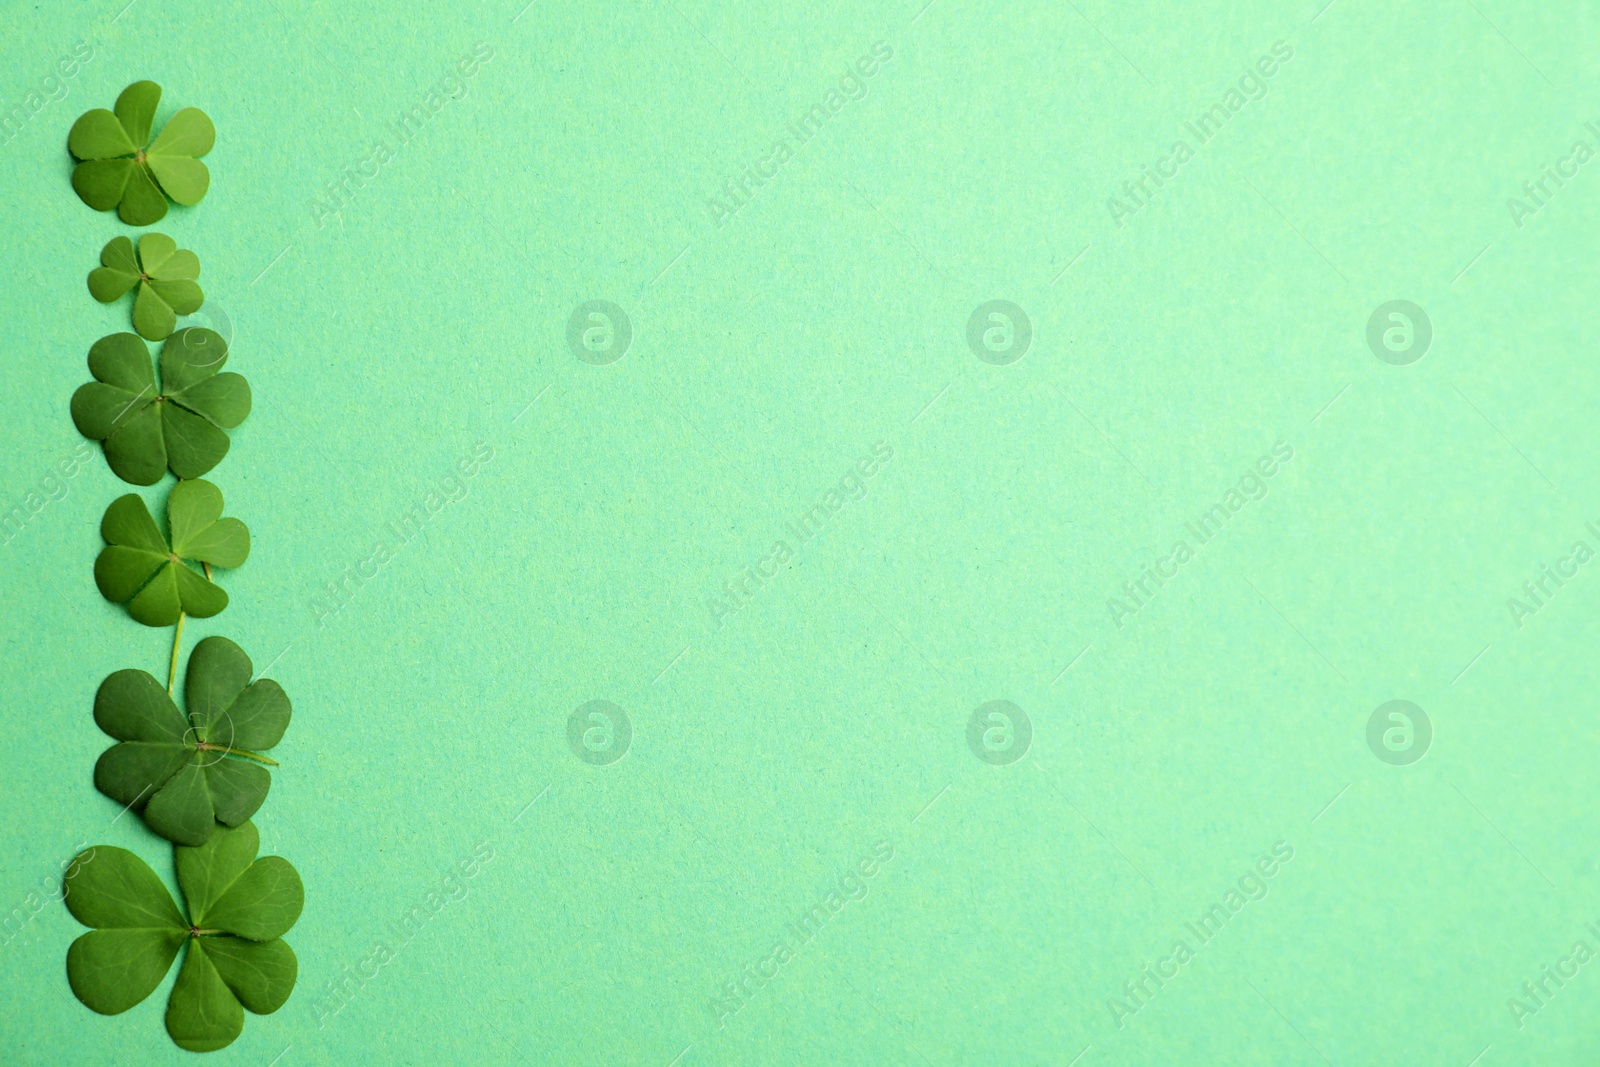 Photo of Clover leaves on green background, flat lay with space for text. St. Patrick's Day symbol